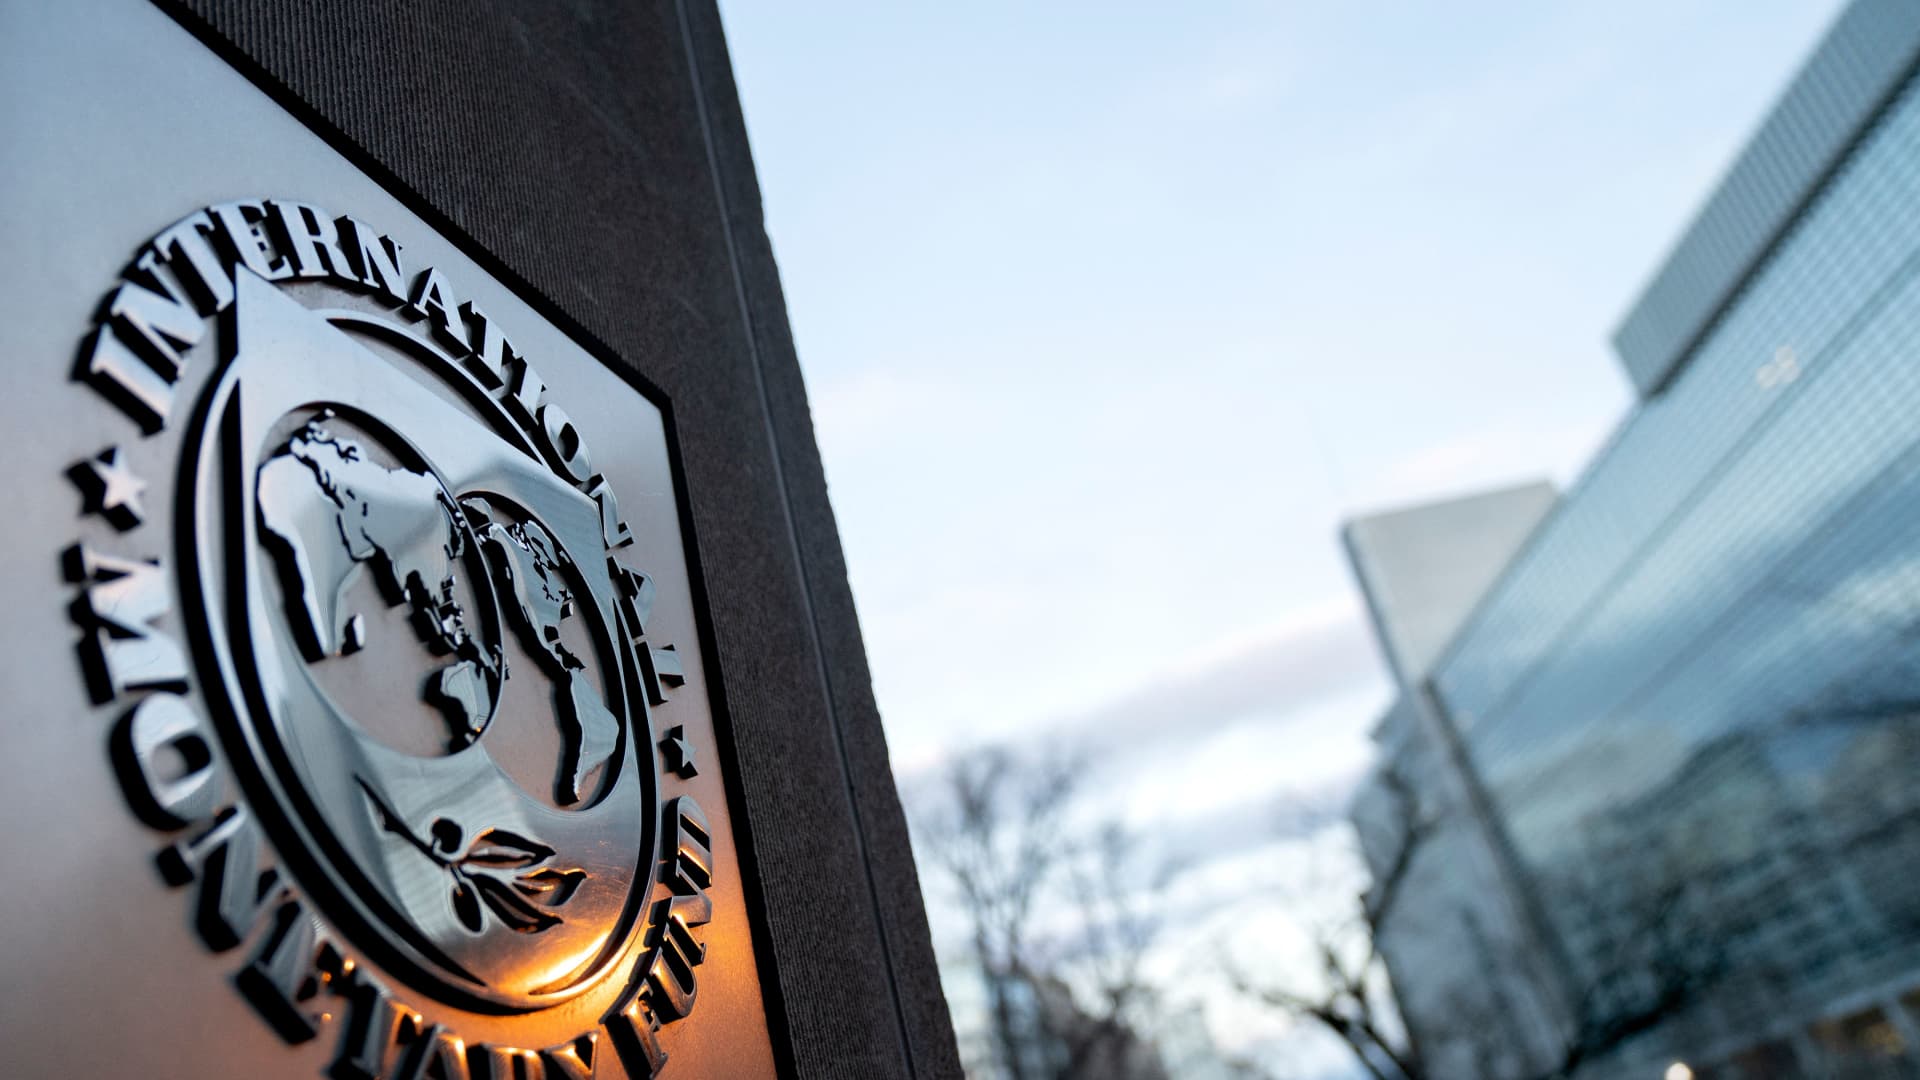 The seal for the International Monetary Fund is seen near the World Bank headquarters (R) in Washington, DC on January 10, 2022.